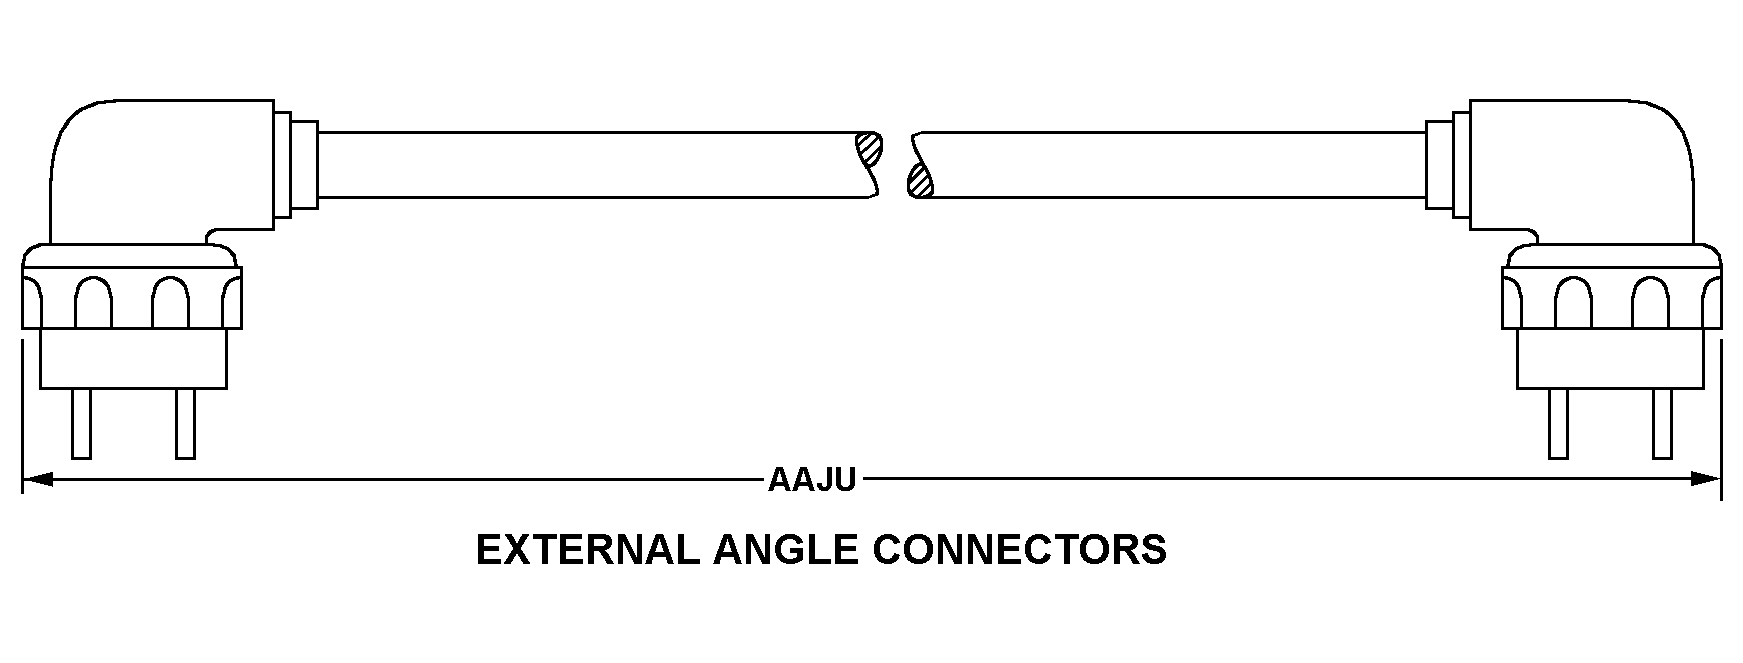 EXTERNAL ANGLE CONNECTORS style nsn 6150-01-325-1419